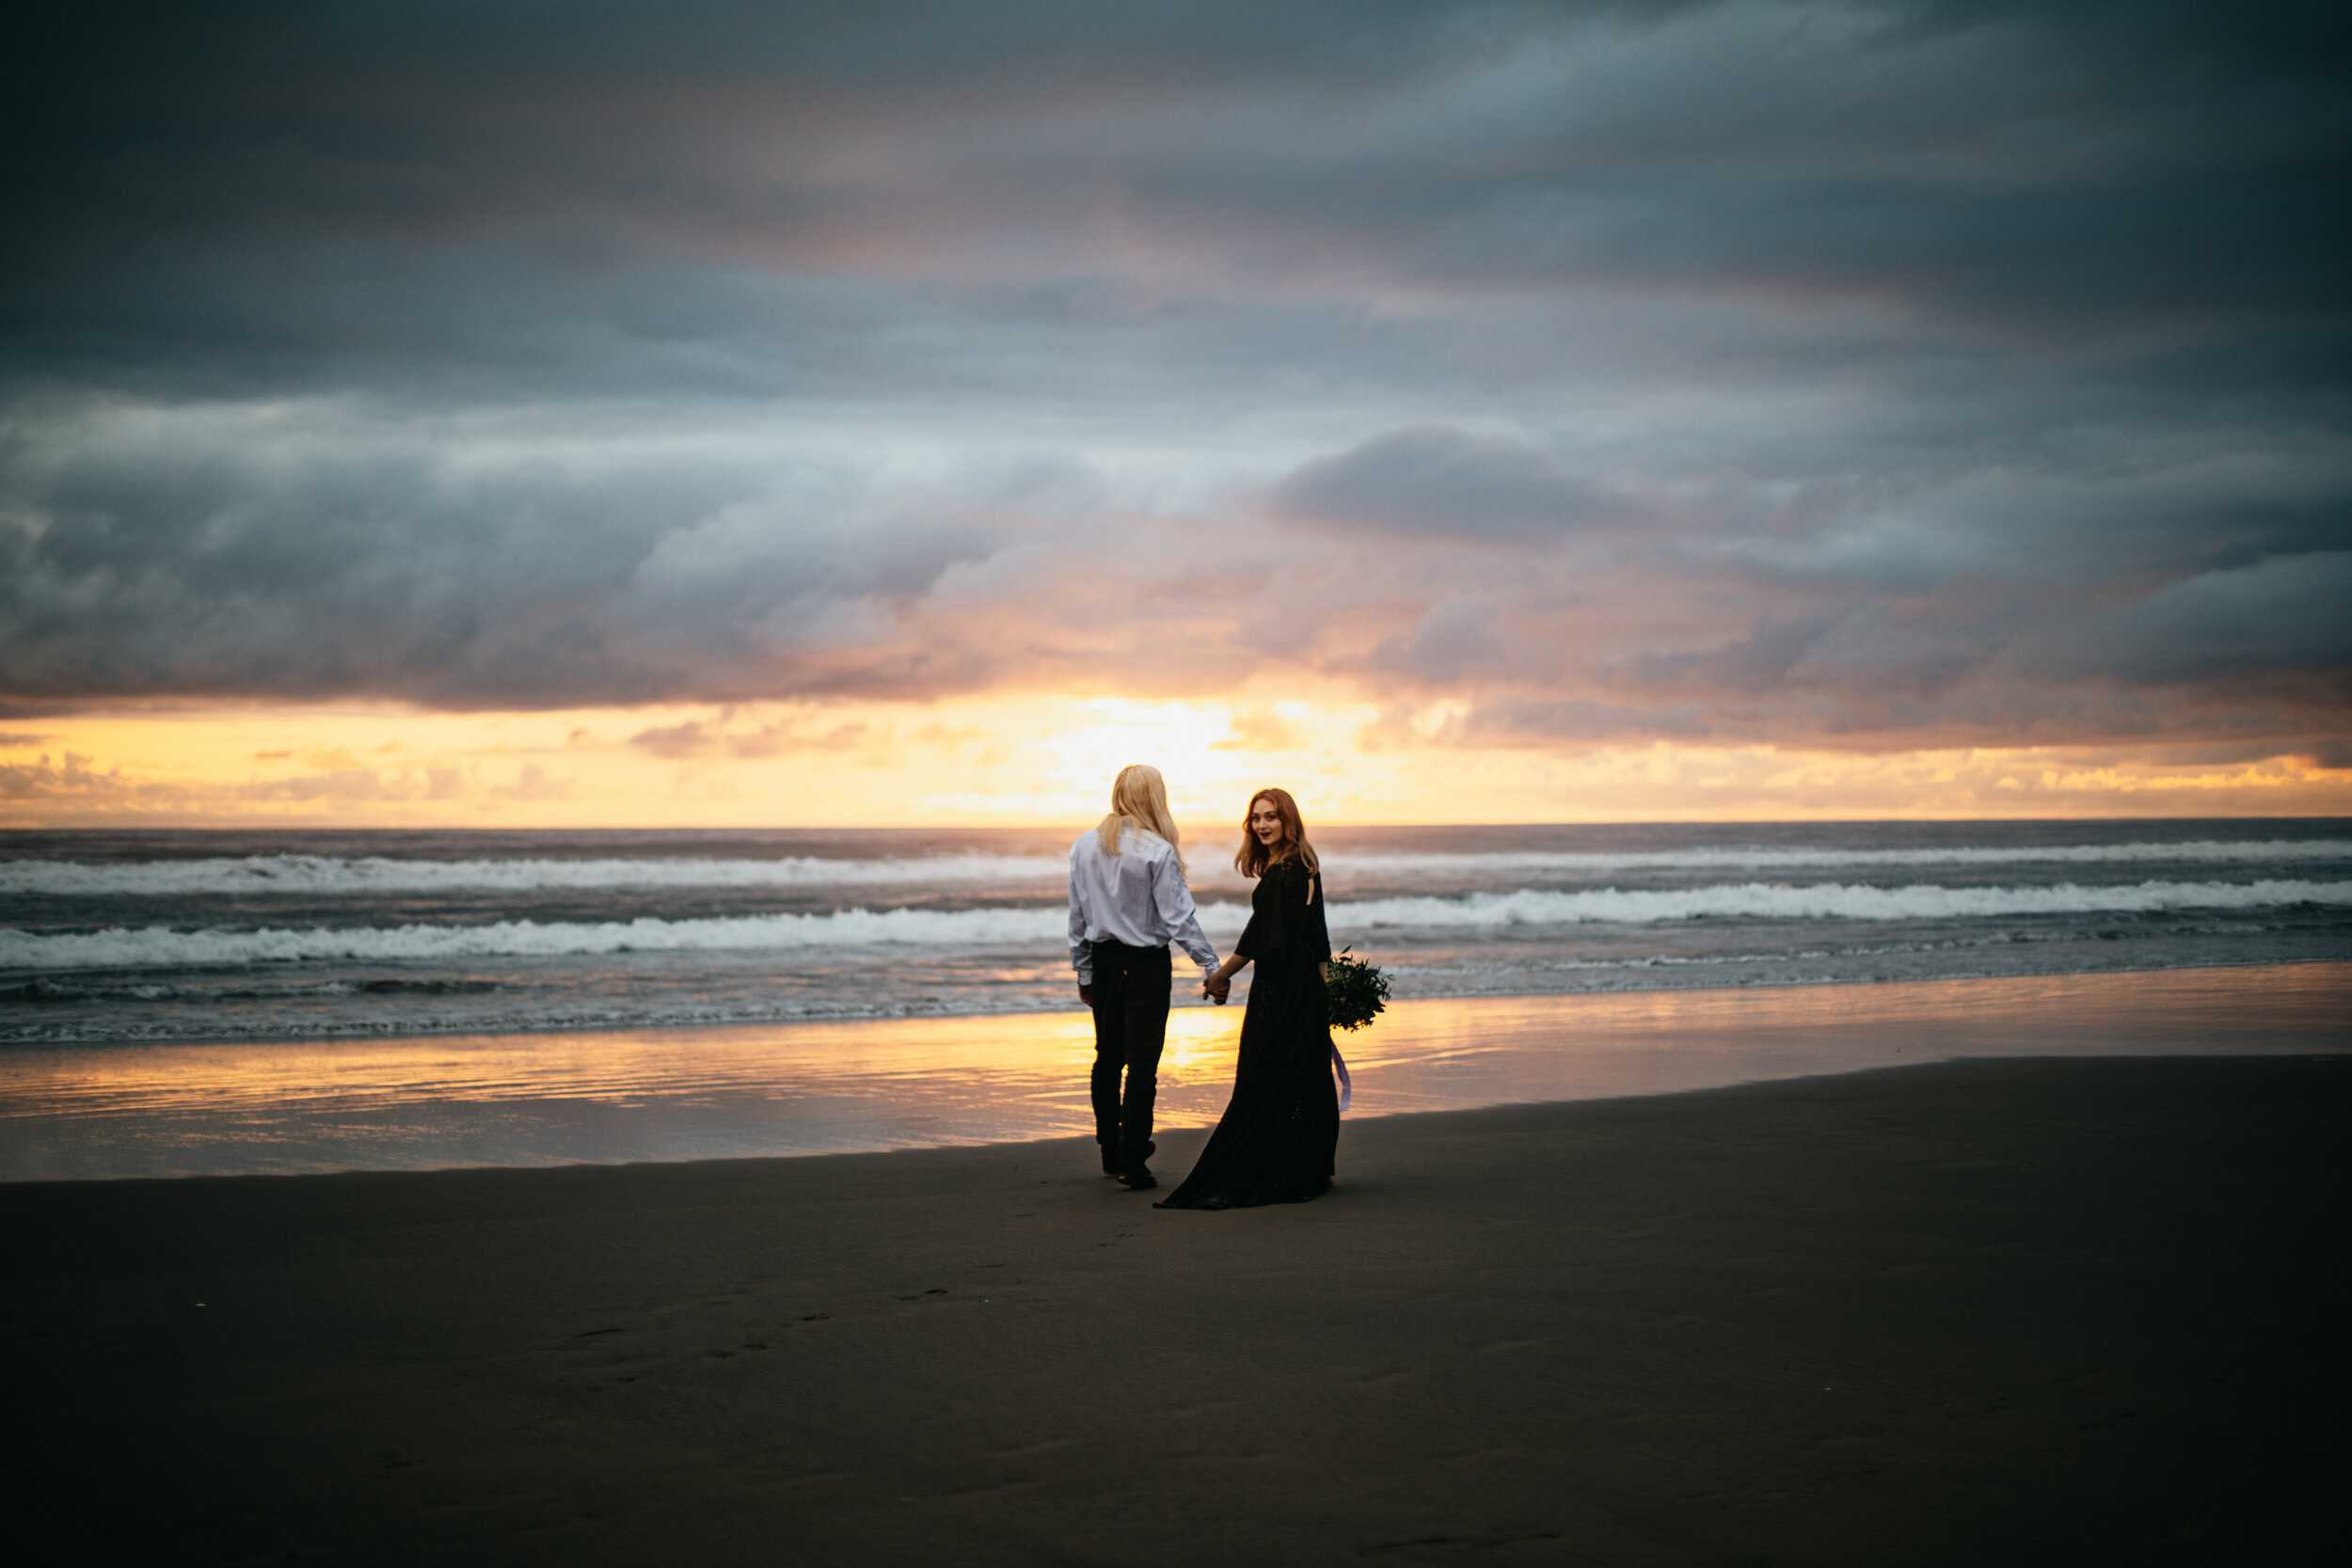 Sunset Photography and Cannon Beach, Oregon